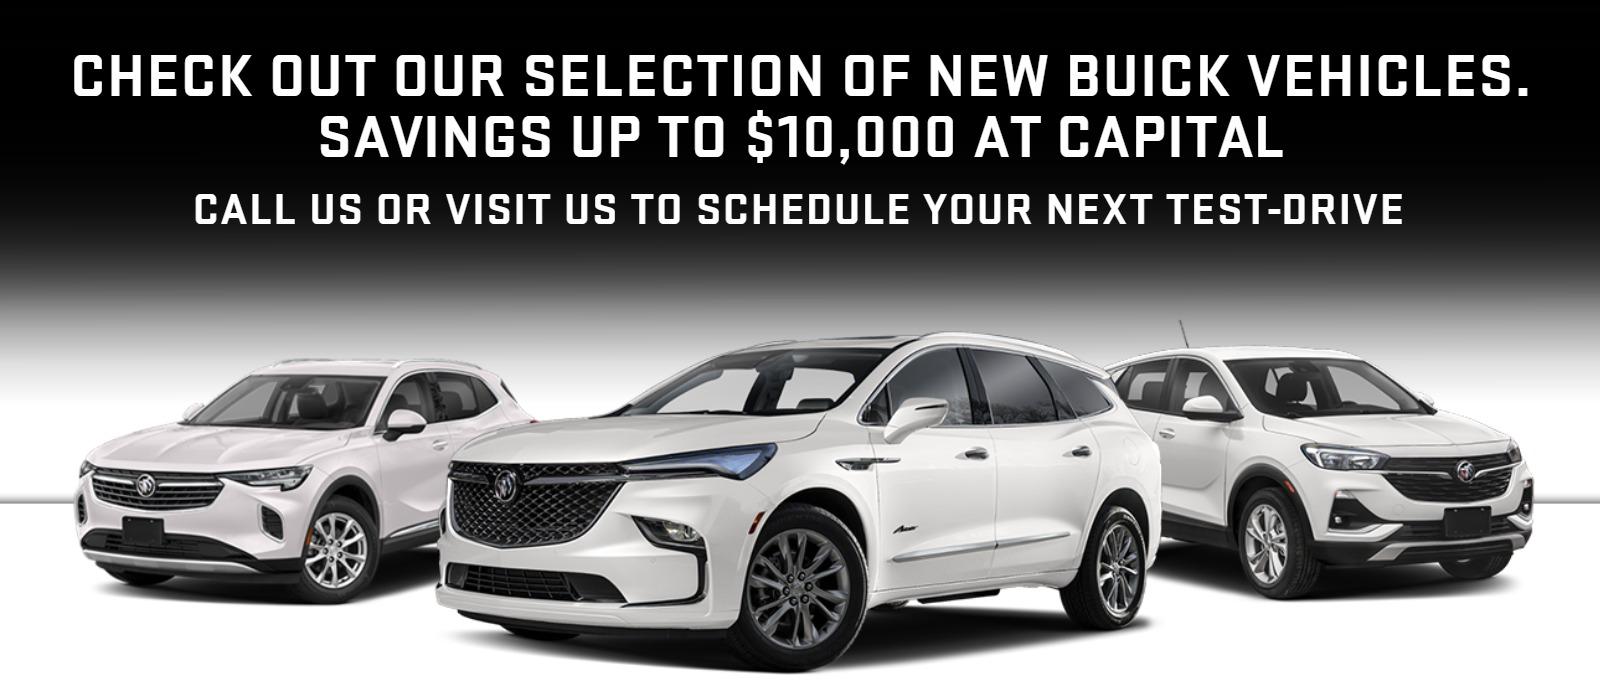 CHECK OUT OUR SELECTION OF NEW BUICK VEHICLES. SAVINGS UP TO $10,000 AT CAPITAL